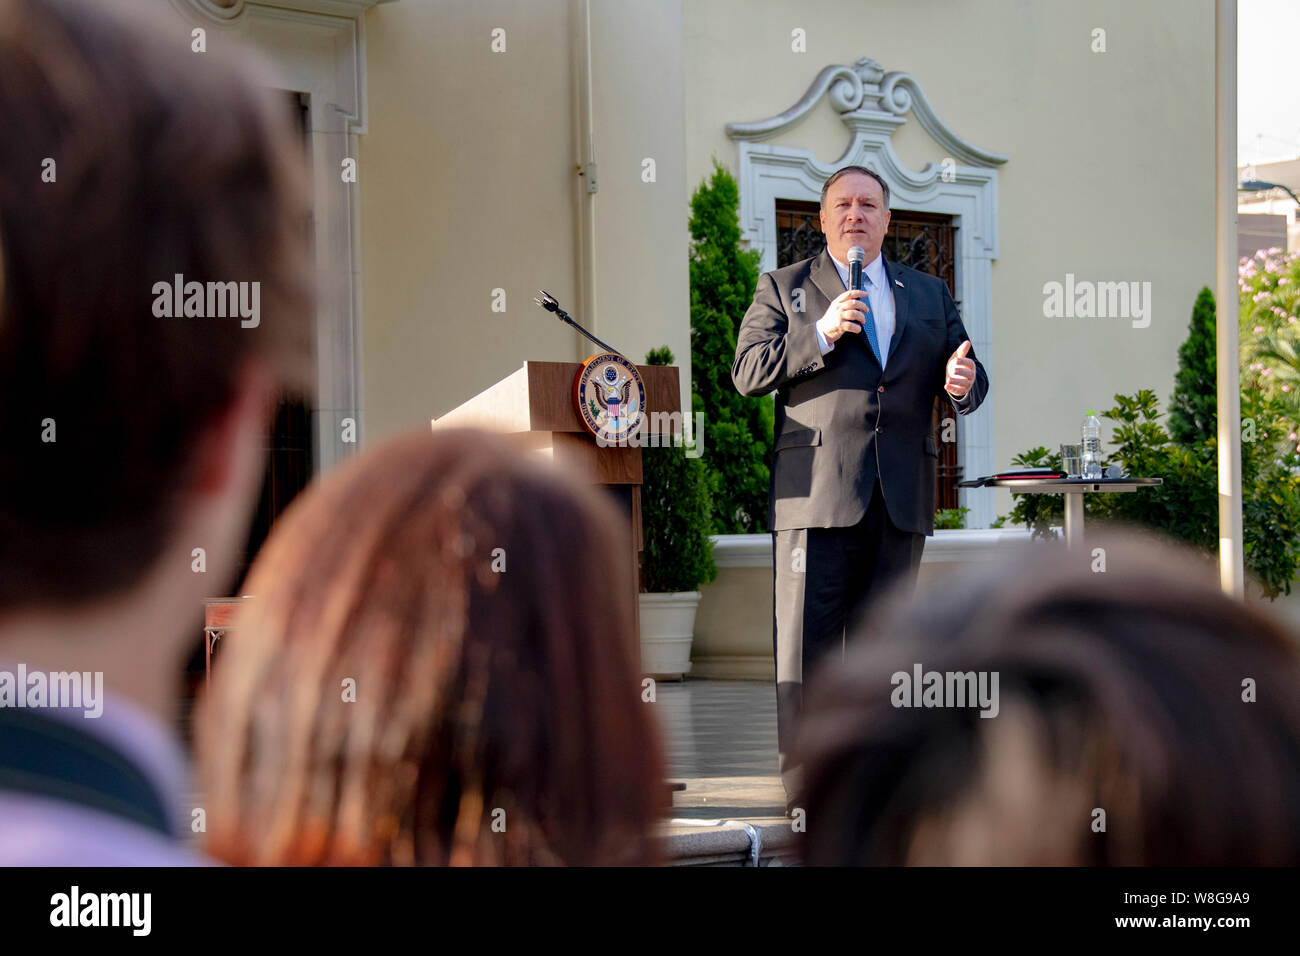 U.S. Secretary of State Michael R. Pompeo delivers remarks while meeting with staff and families of U.S. Embassy Lima, in Lima, Peru, April 13, 2019 Stock Photo